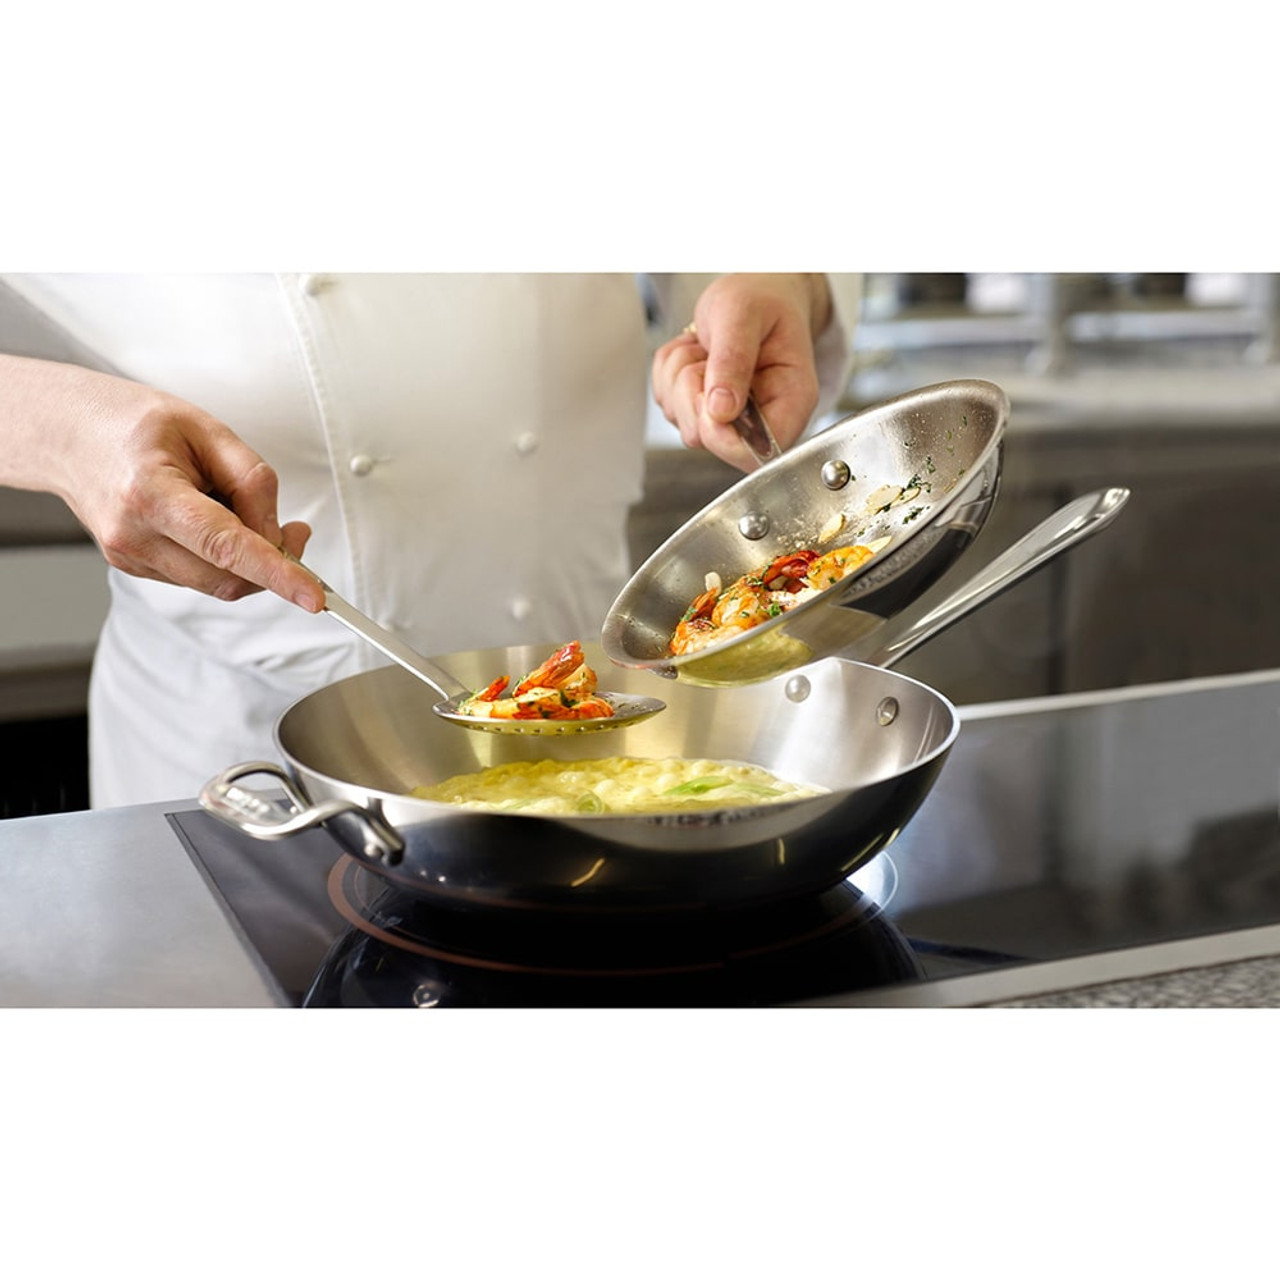 All-Clad d3 Stainless 8 Fry Pan + Reviews